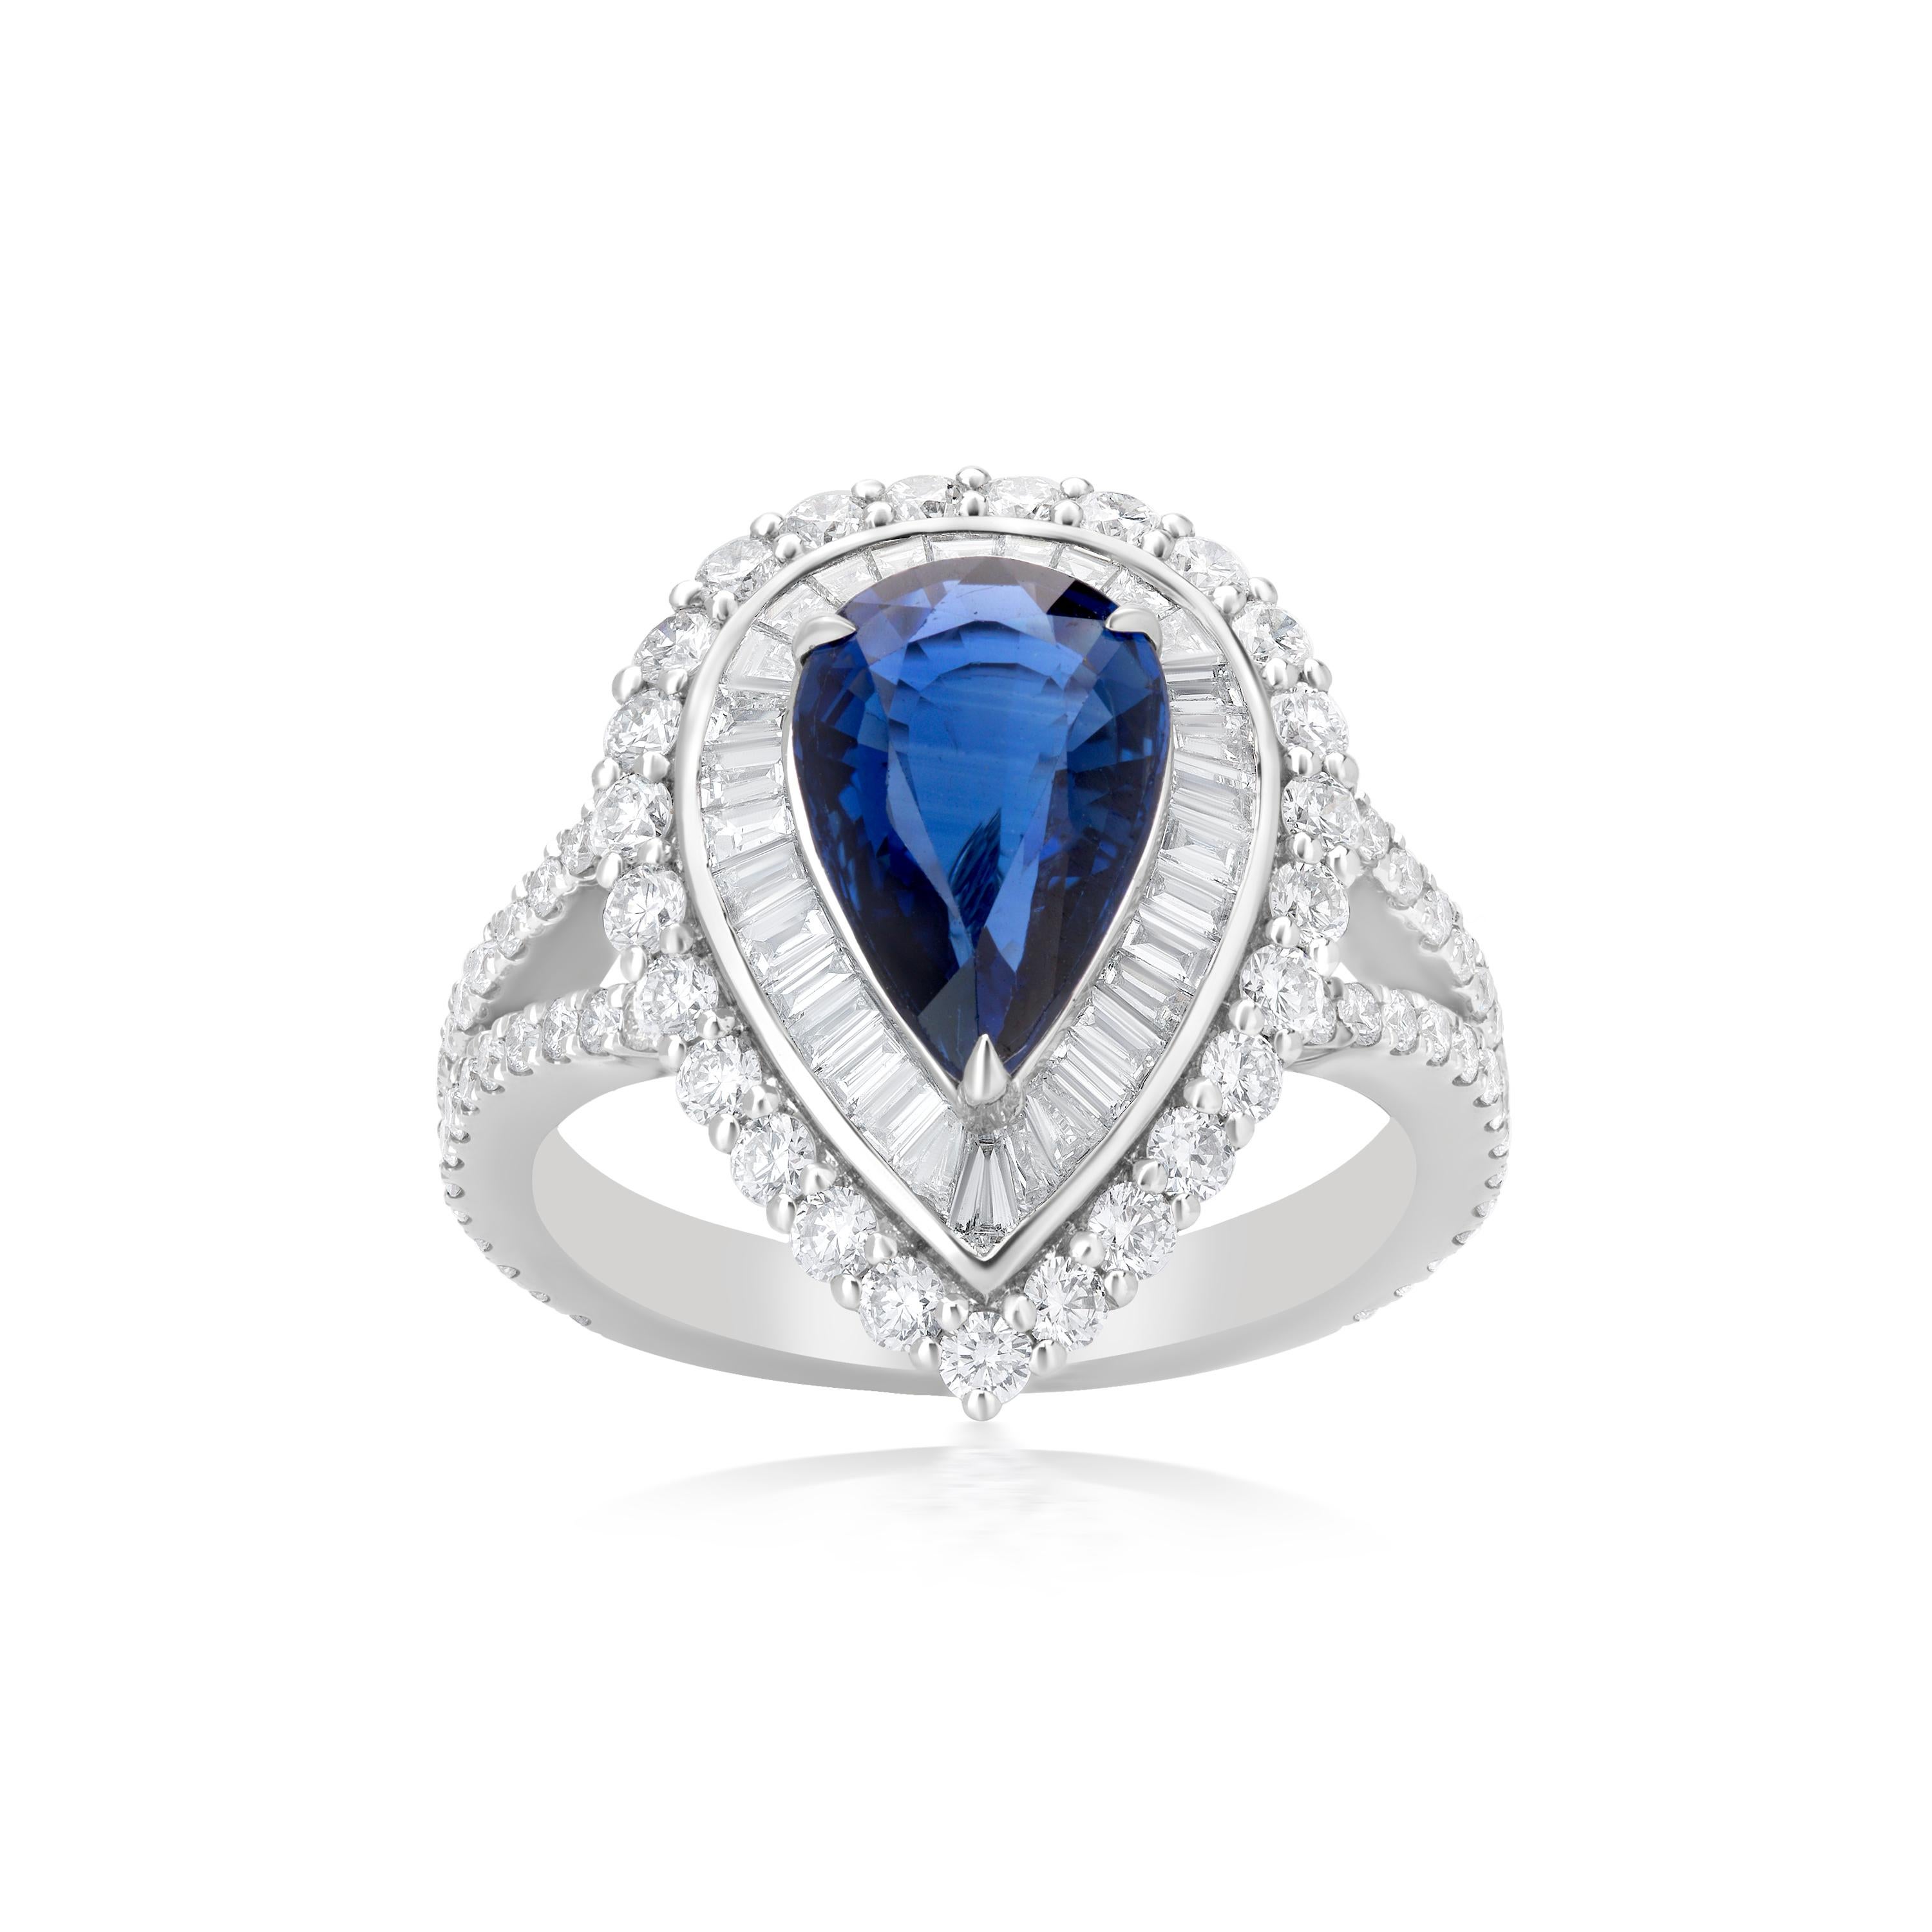 Pear Cut Nigaam 4.38 Carat T.W. Blue Sapphire and Diamond Cluster Ring in 18k White Gold